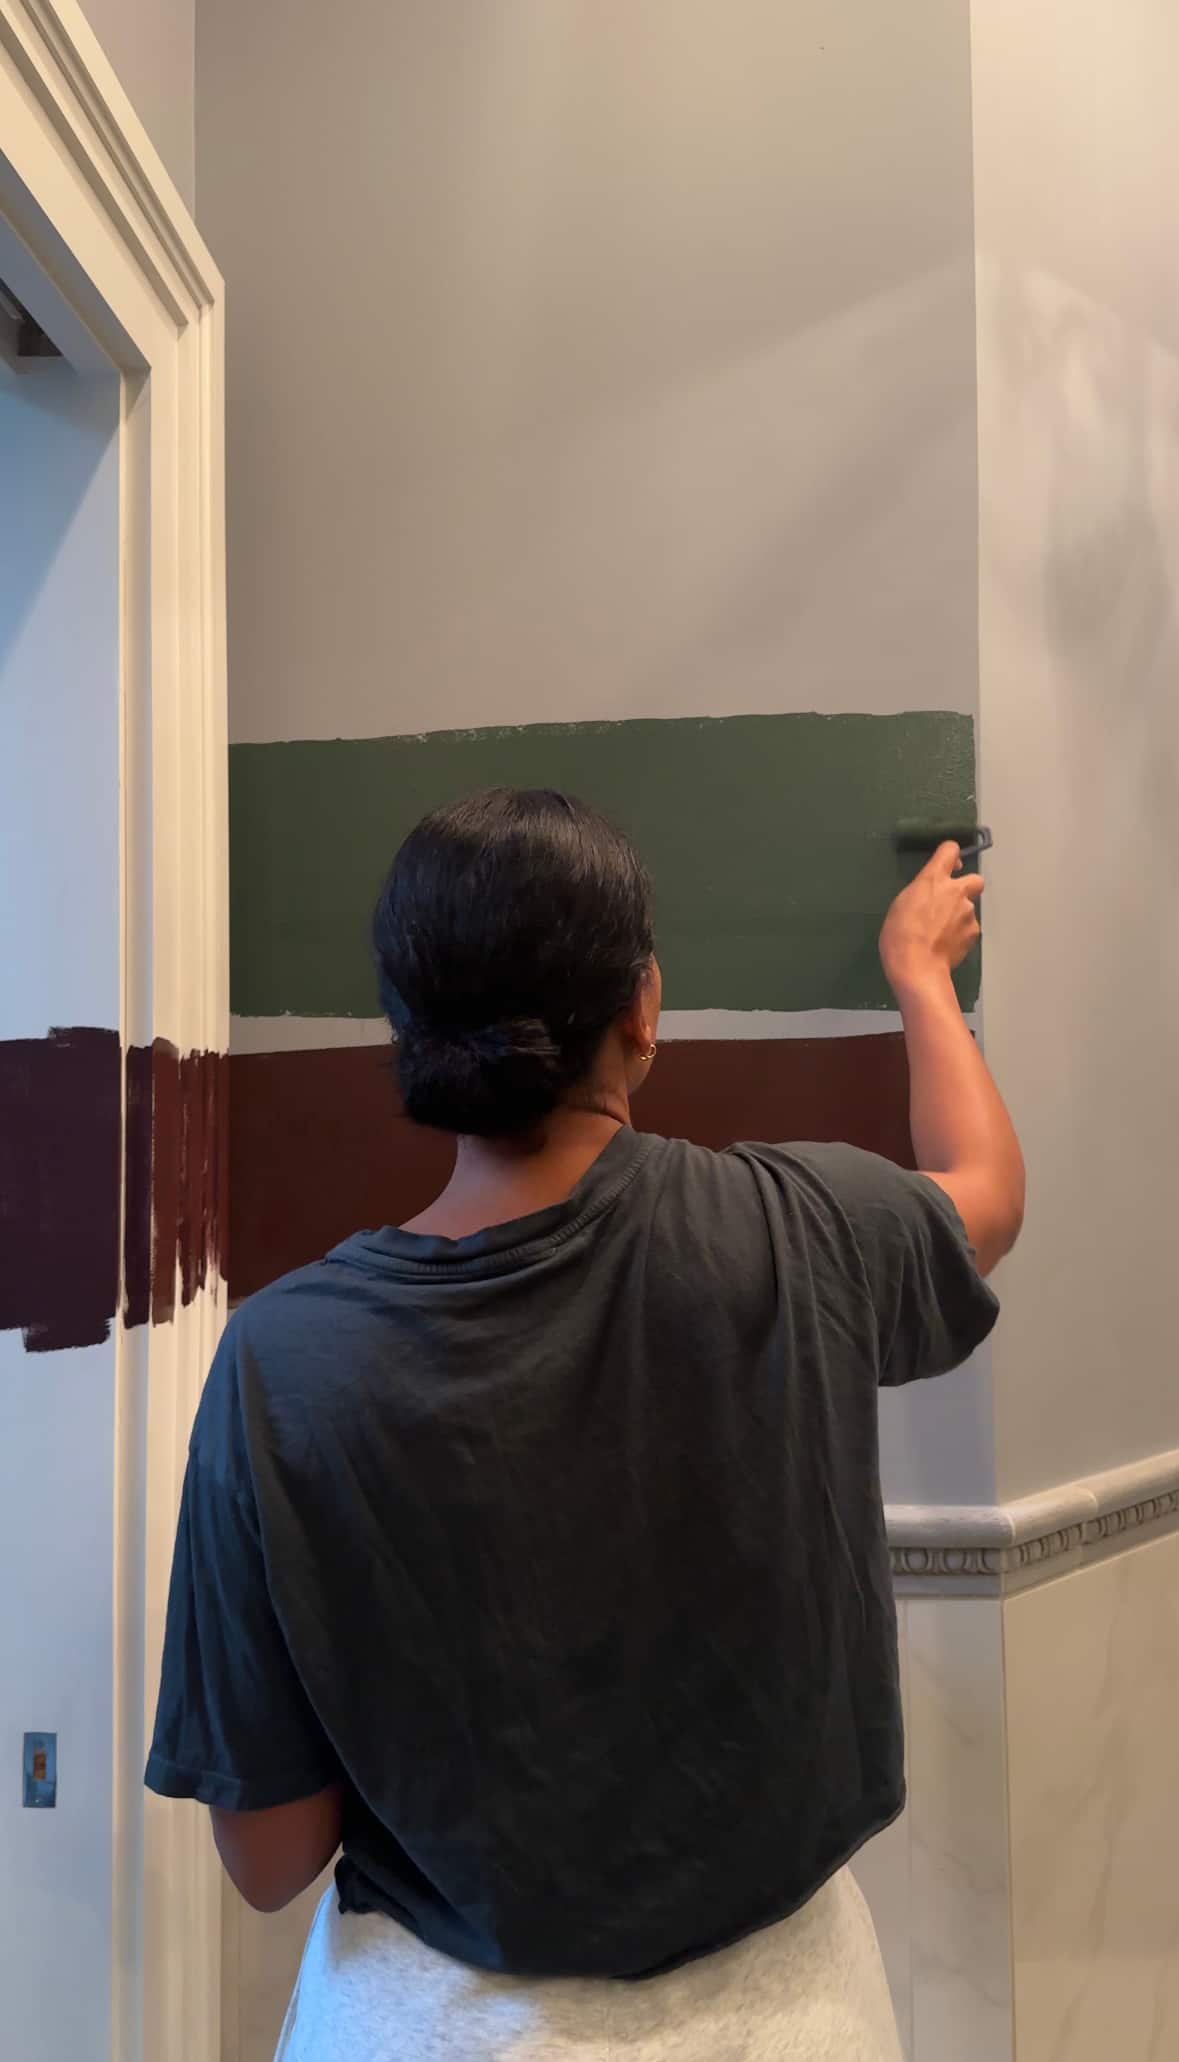 A person painting different colors on a wall.